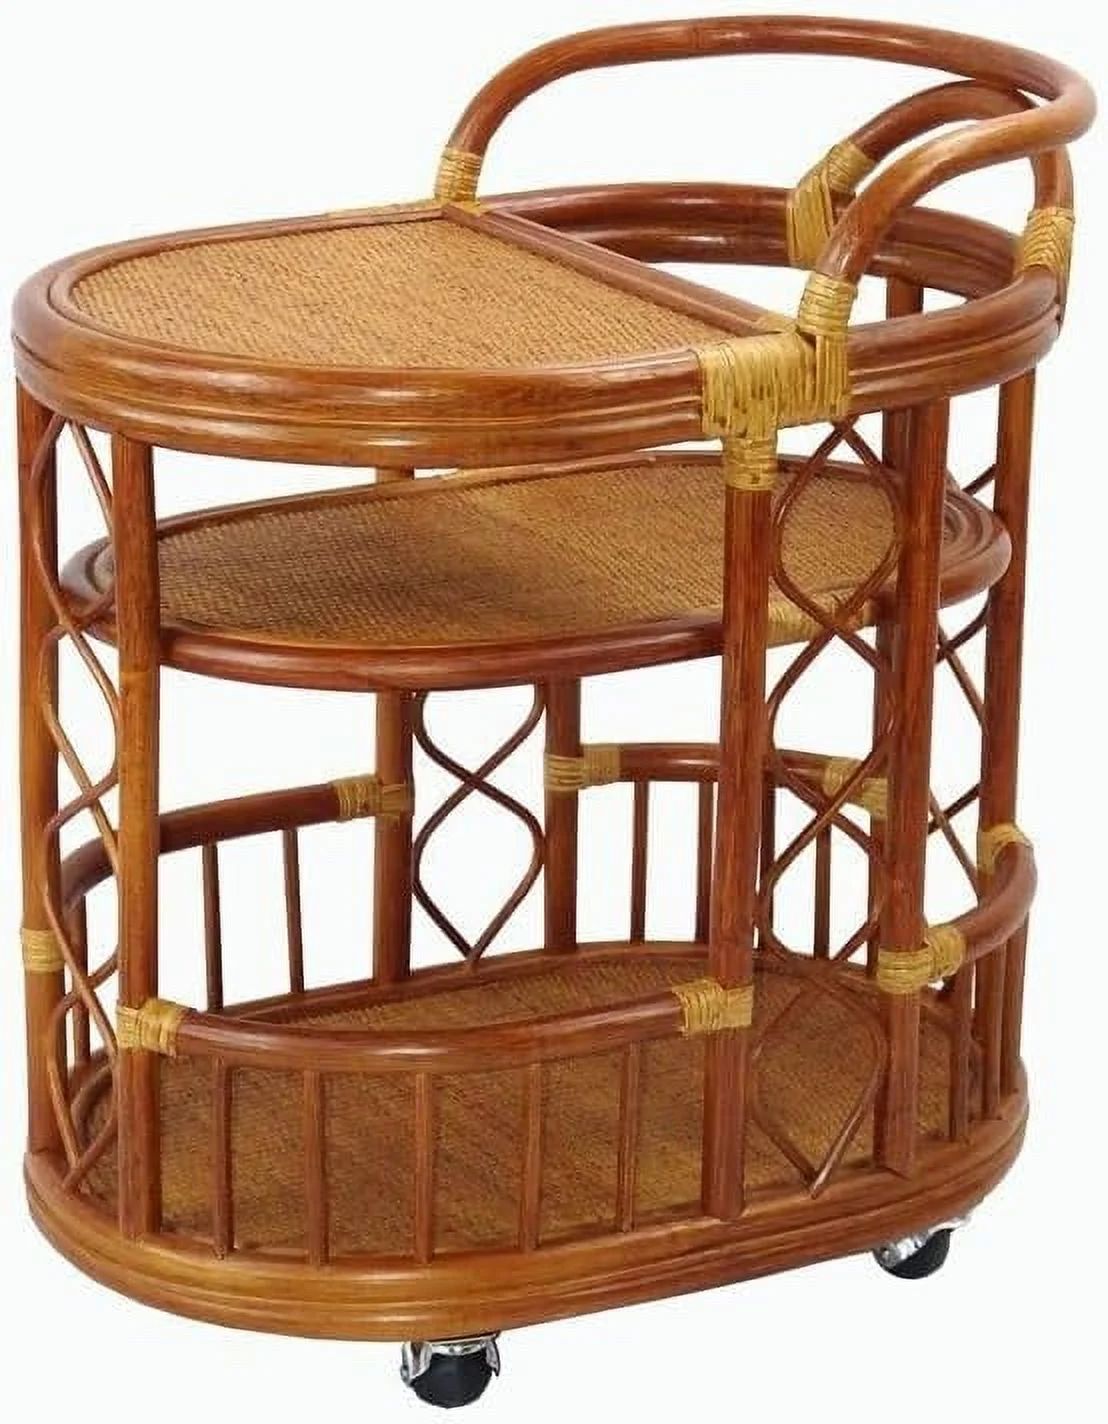 Serving Cart Handmade Woven Natural Rattan Wicker With Wheels Fully Assembled Colonial Color | Walmart (US)